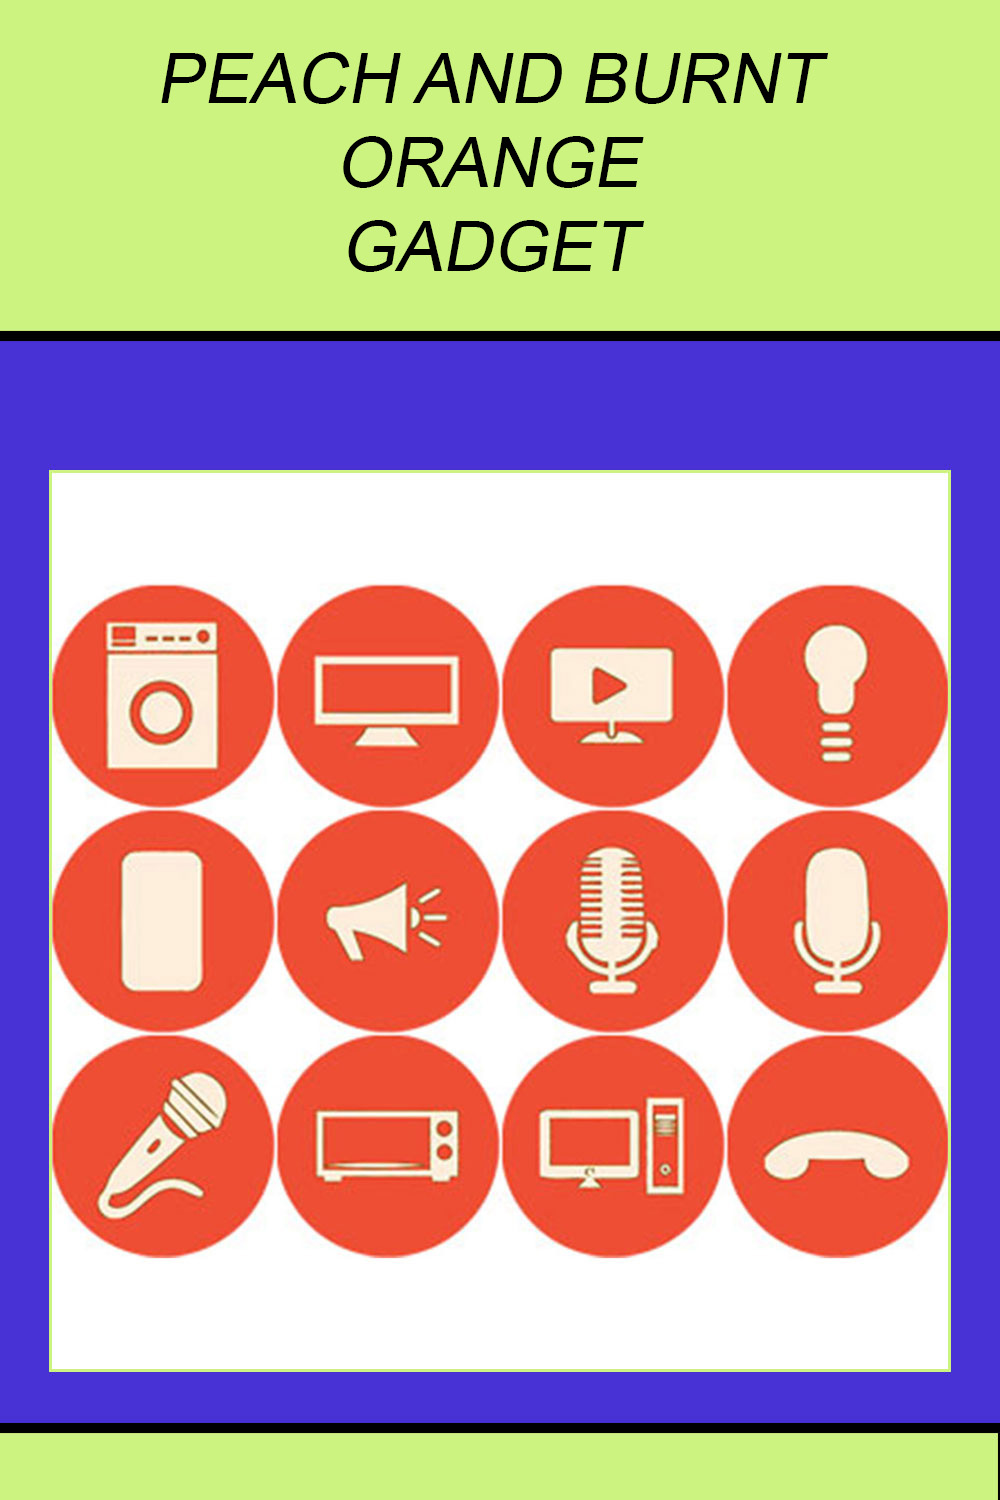 PEACH AND BURNT ORANGE GADGET ROUND ICONS pinterest preview image.